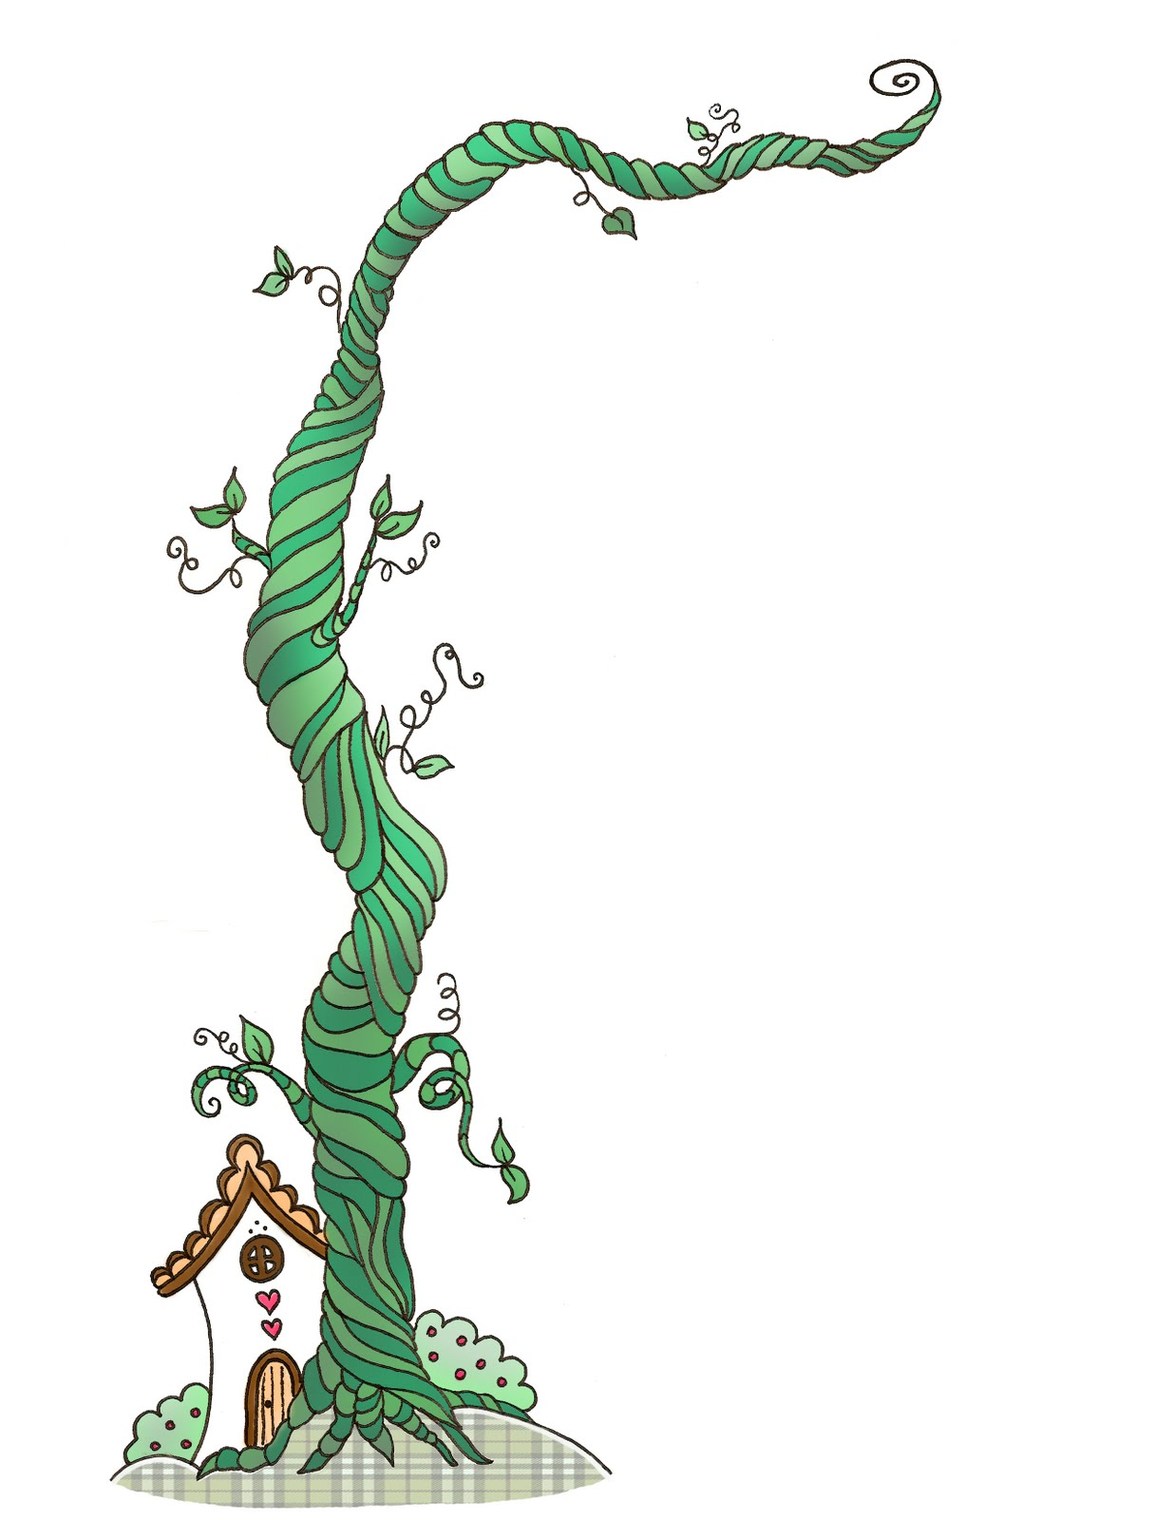 Jack From Jack And The Beanstalk Clipart - Free to use Clip Art ...